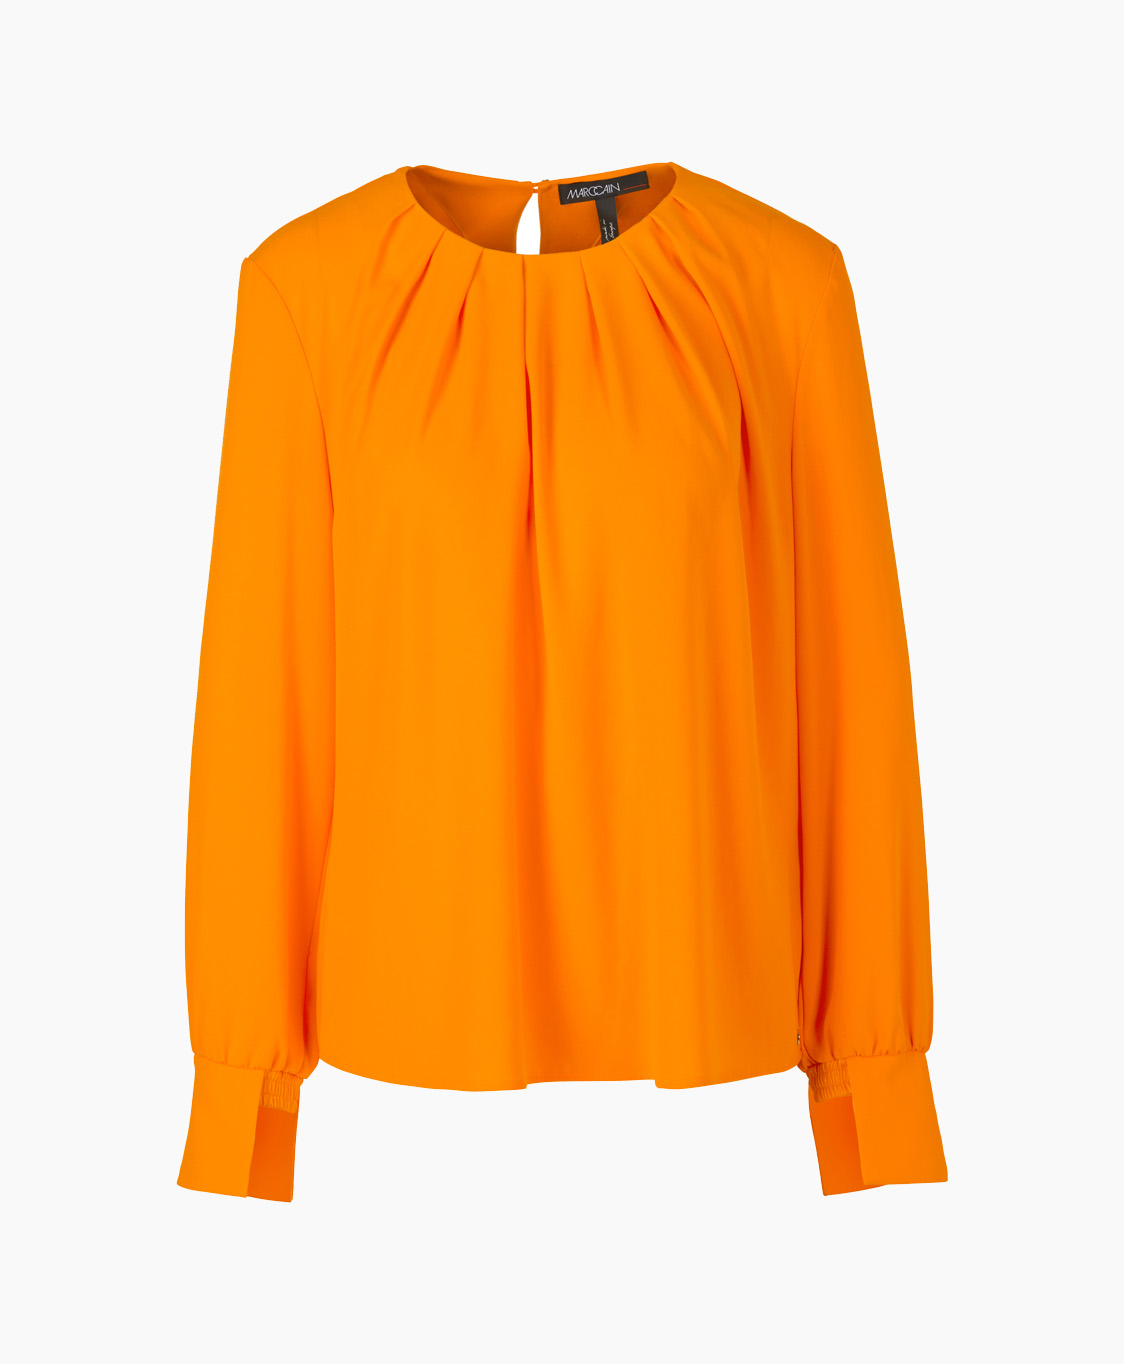 Marccain Collectie Blouse Uc 55.09 W01 Peach